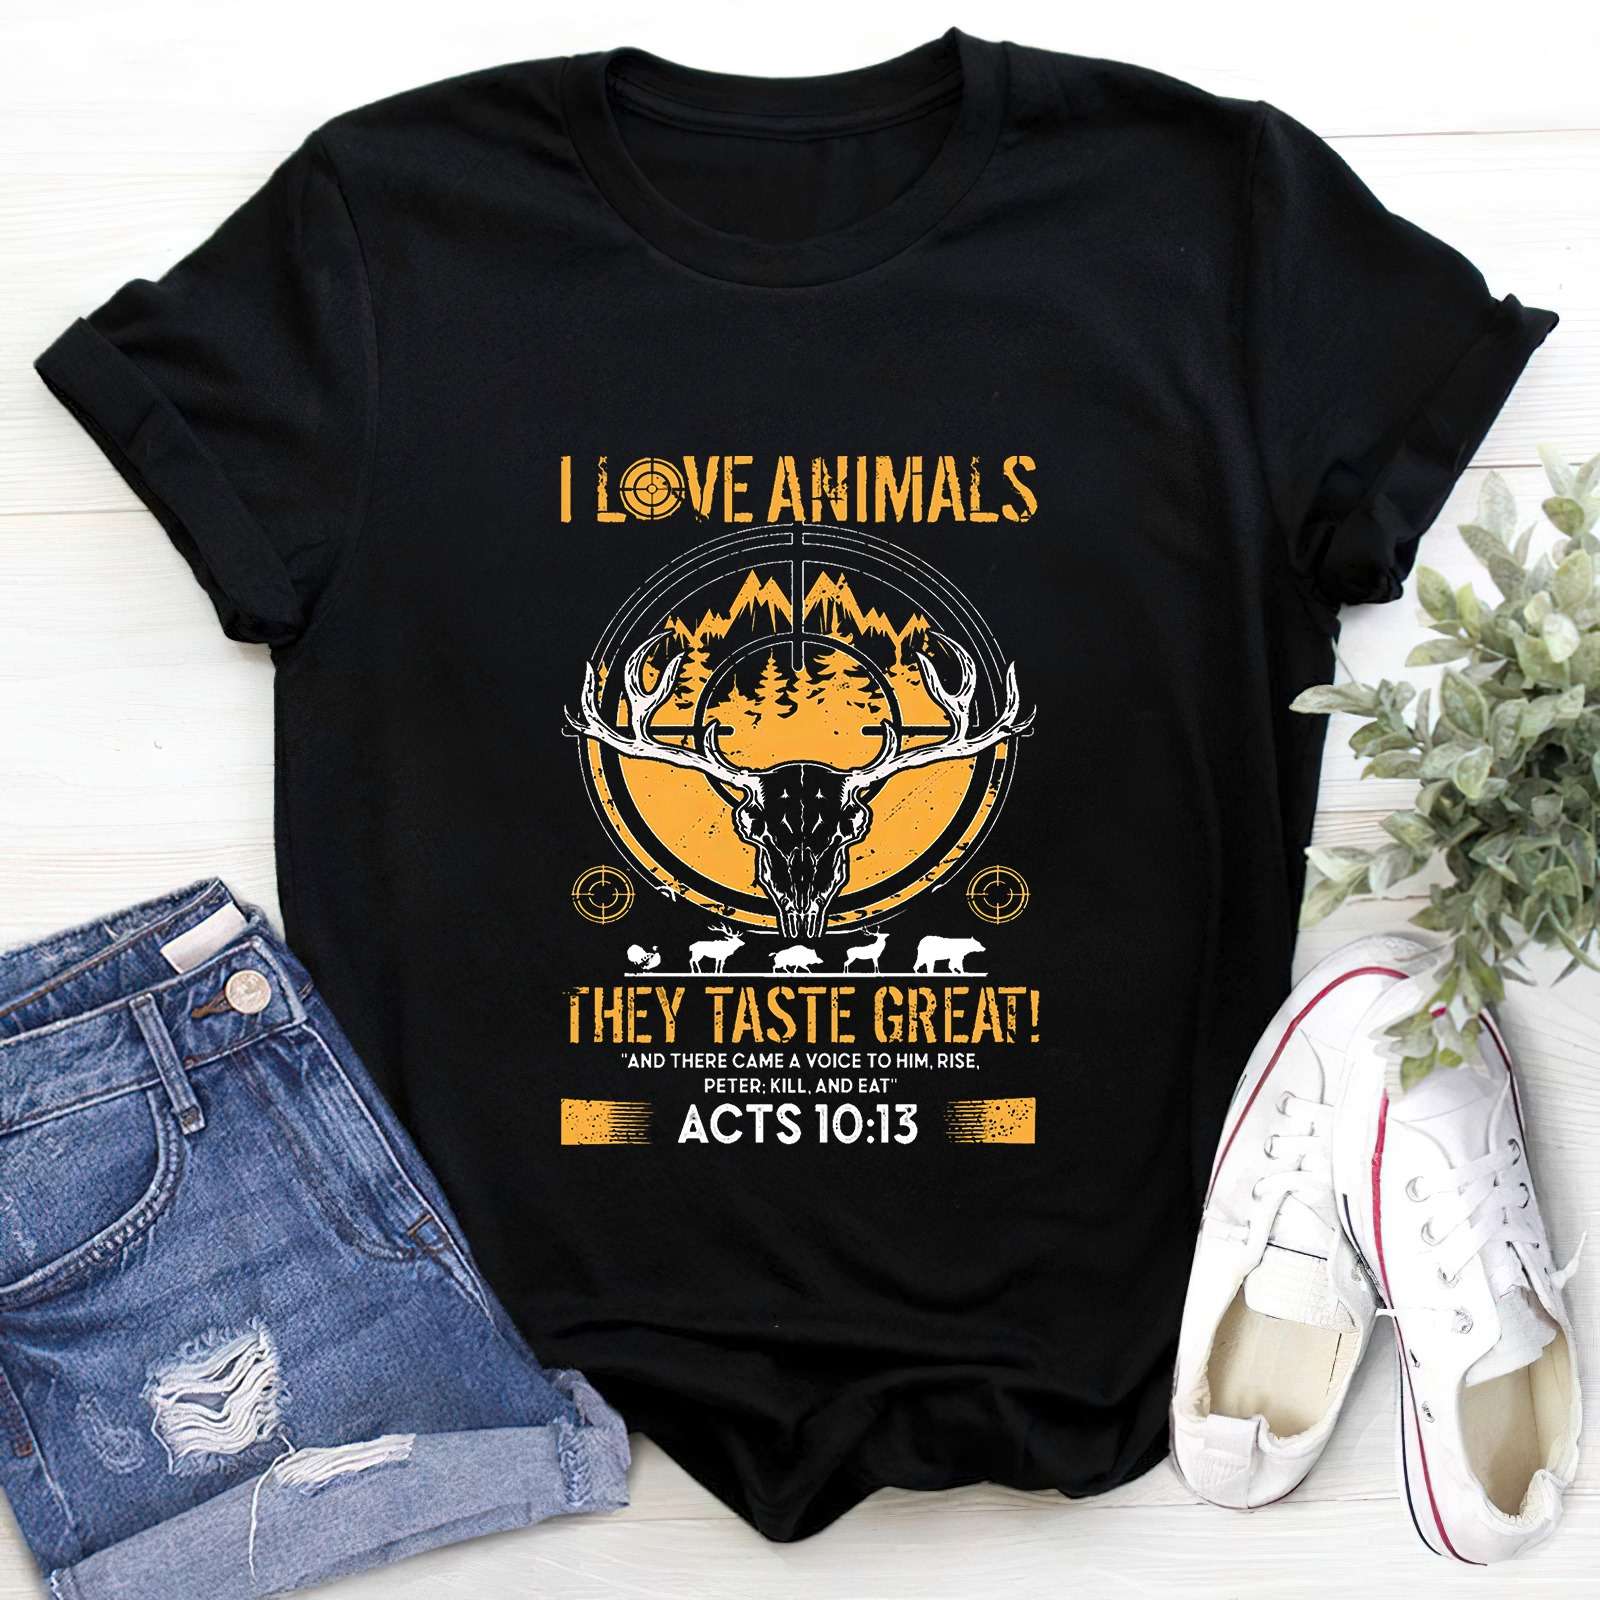 I love animals they taste great - Love hunting animals, T-shirt for the hunter